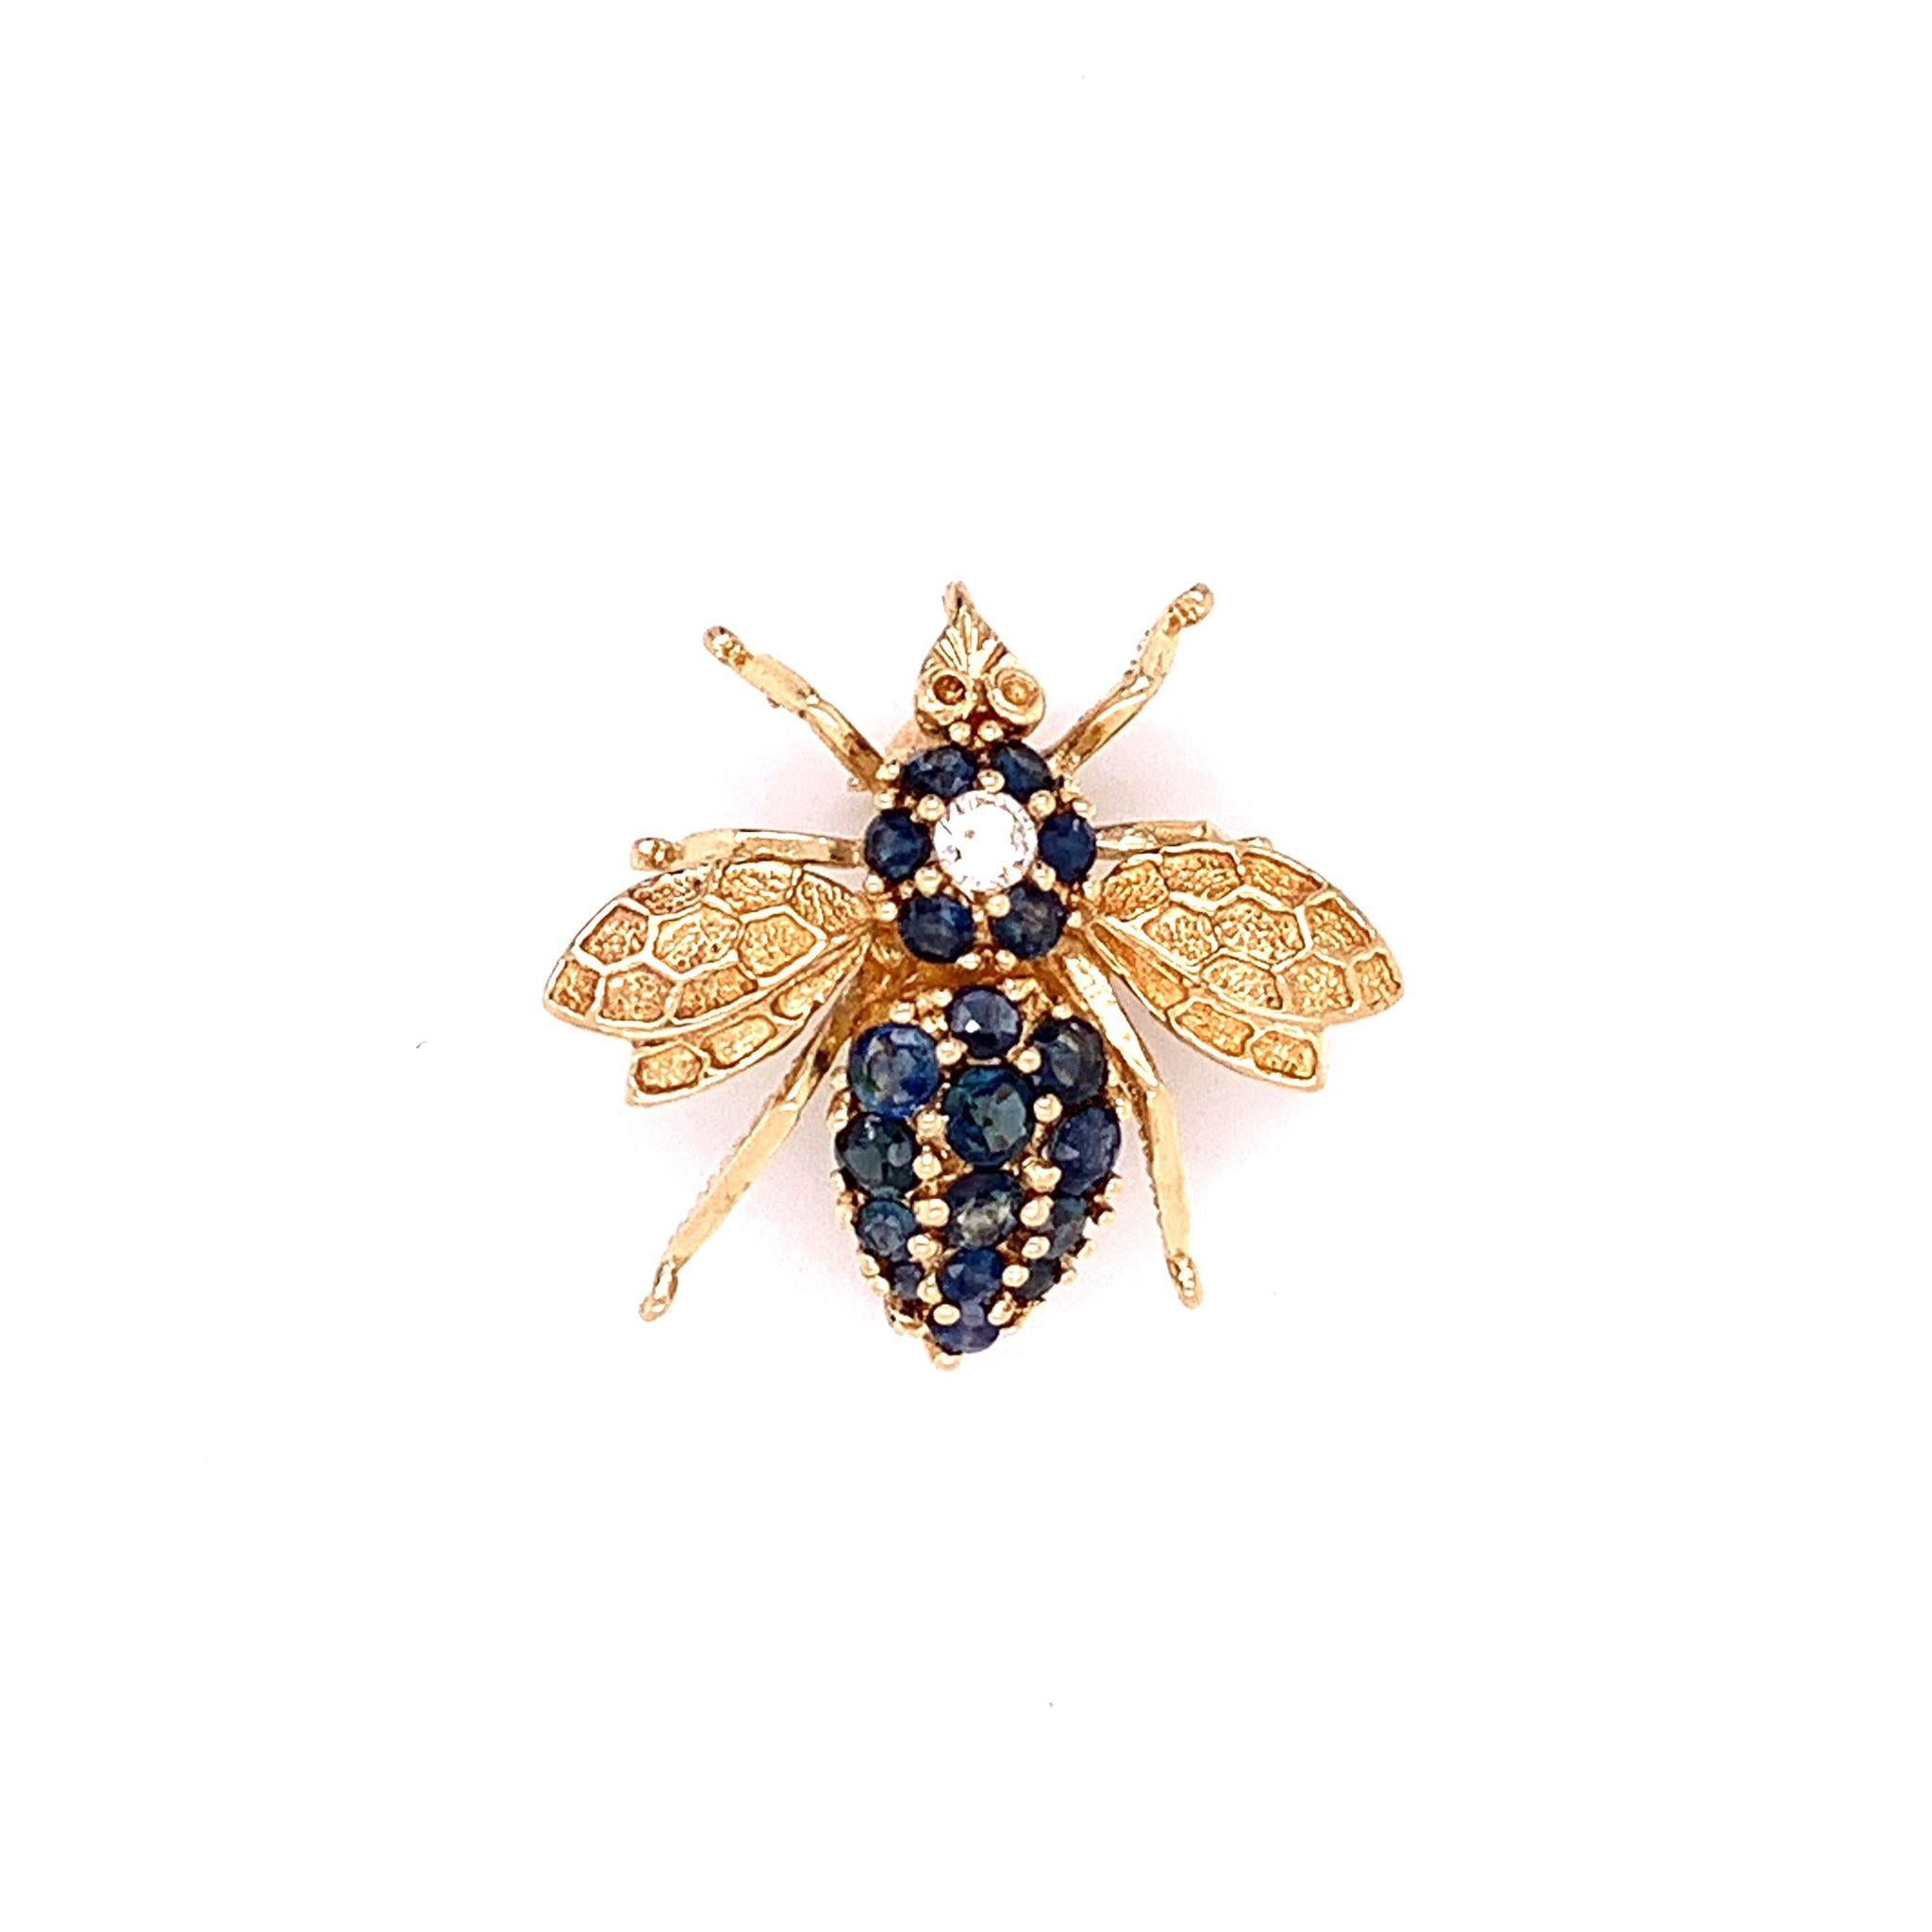 A lovely little bumblebee you will not mid landing on your shirt. This pin features round cut blue sapphire along with 1 large round cut diamond set in 14k yellow gold. A great addition to any outfit, lightweight and easy to wear.

Dimensions: 0.90